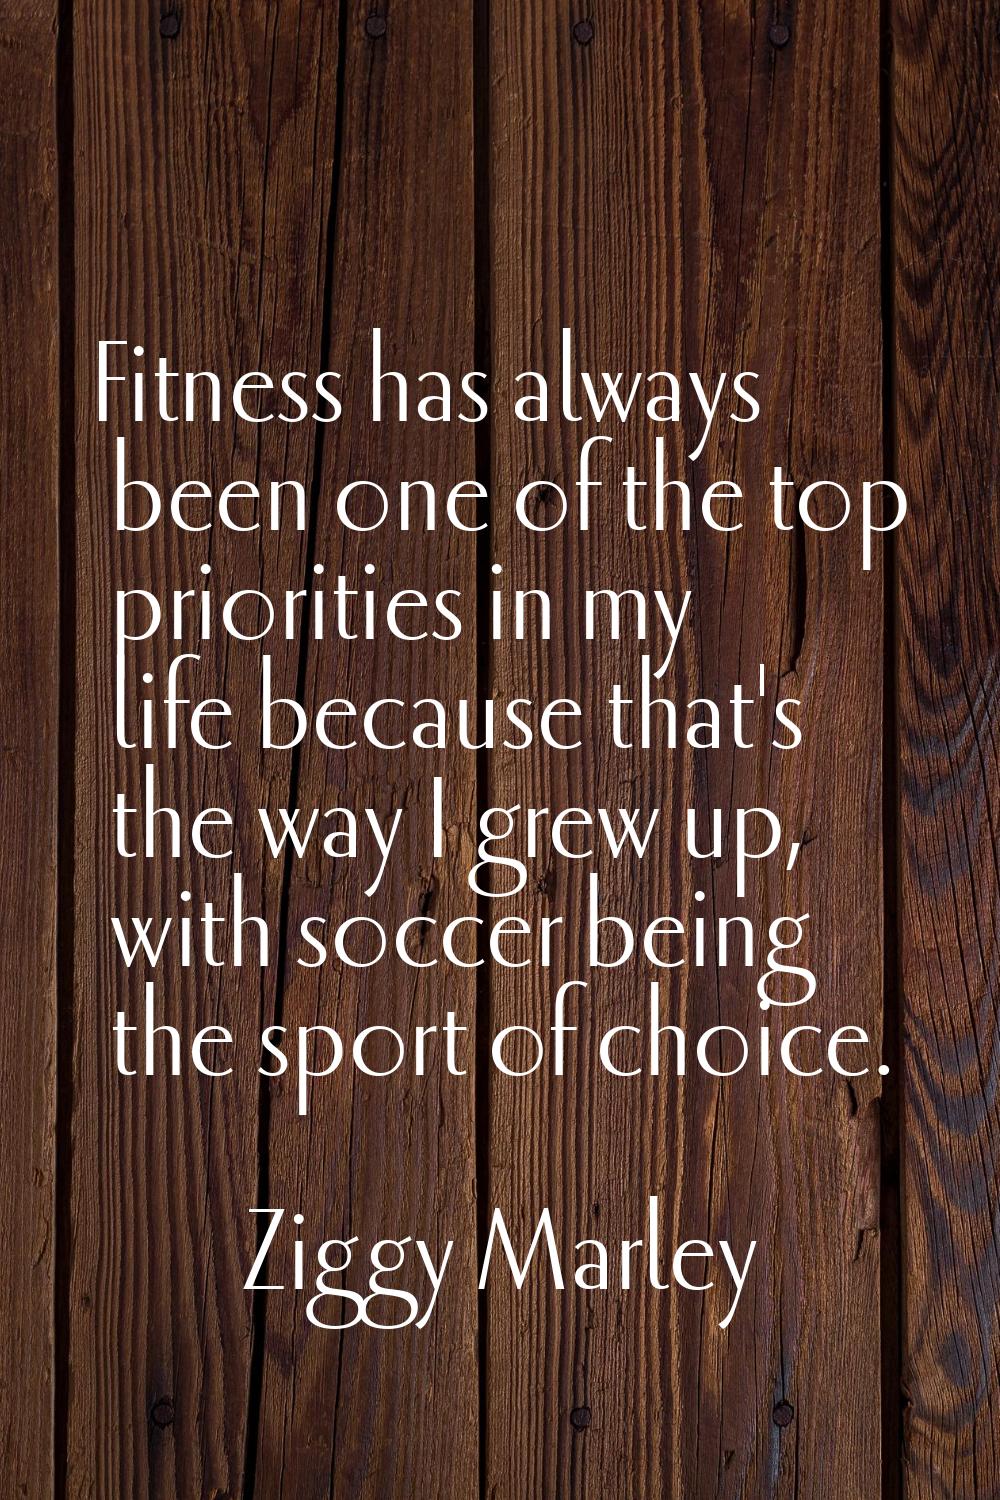 Fitness has always been one of the top priorities in my life because that's the way I grew up, with